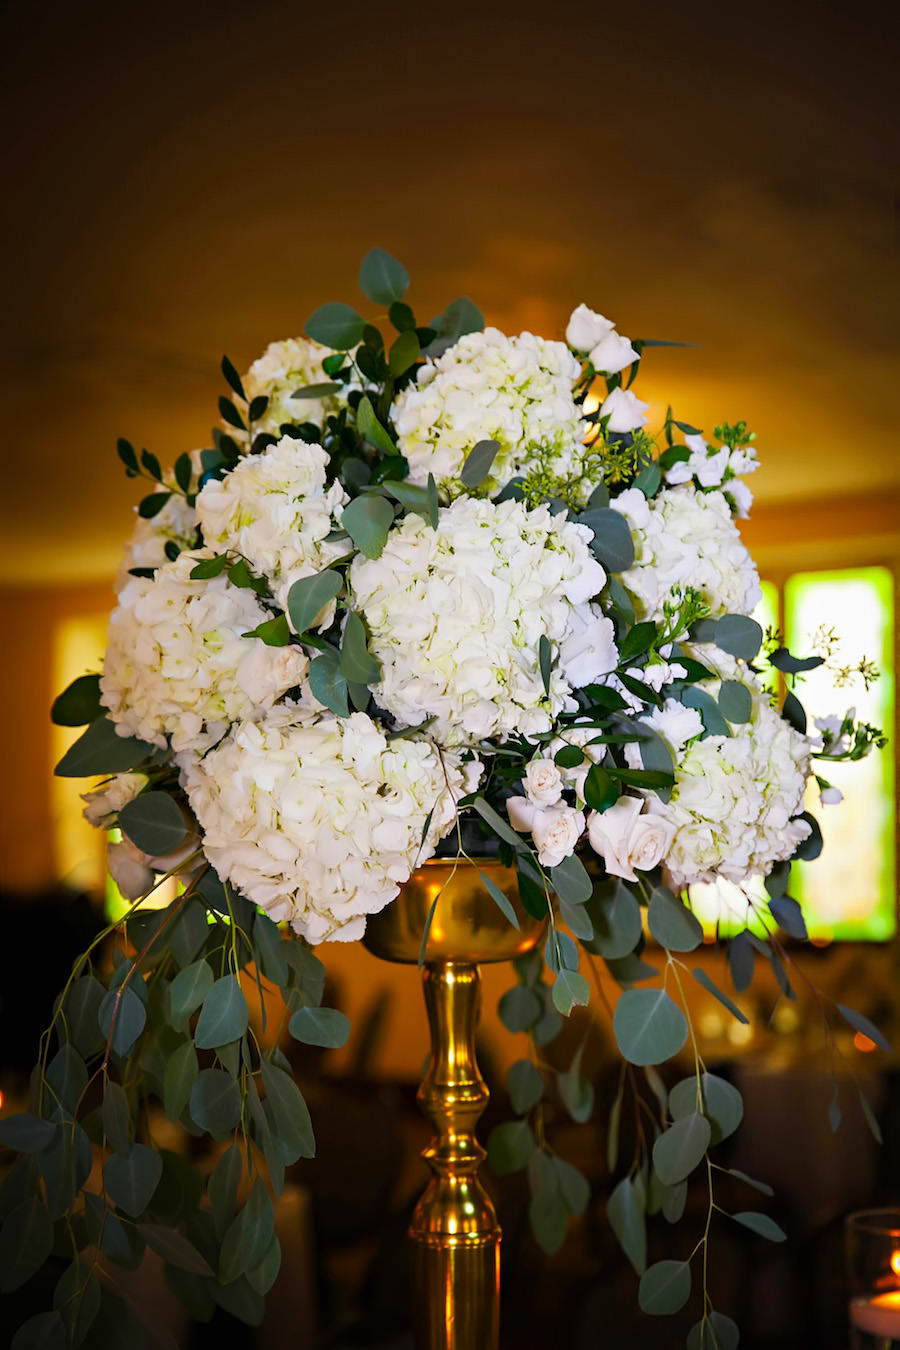 Tall Wedding Centerpieces in Gold Vases with Cascading White Hydrangeas and Greenery | Flowers by St. Petersburg Florida Wedding Florist Iza’s Flowers | Wedding Planner Special Moments